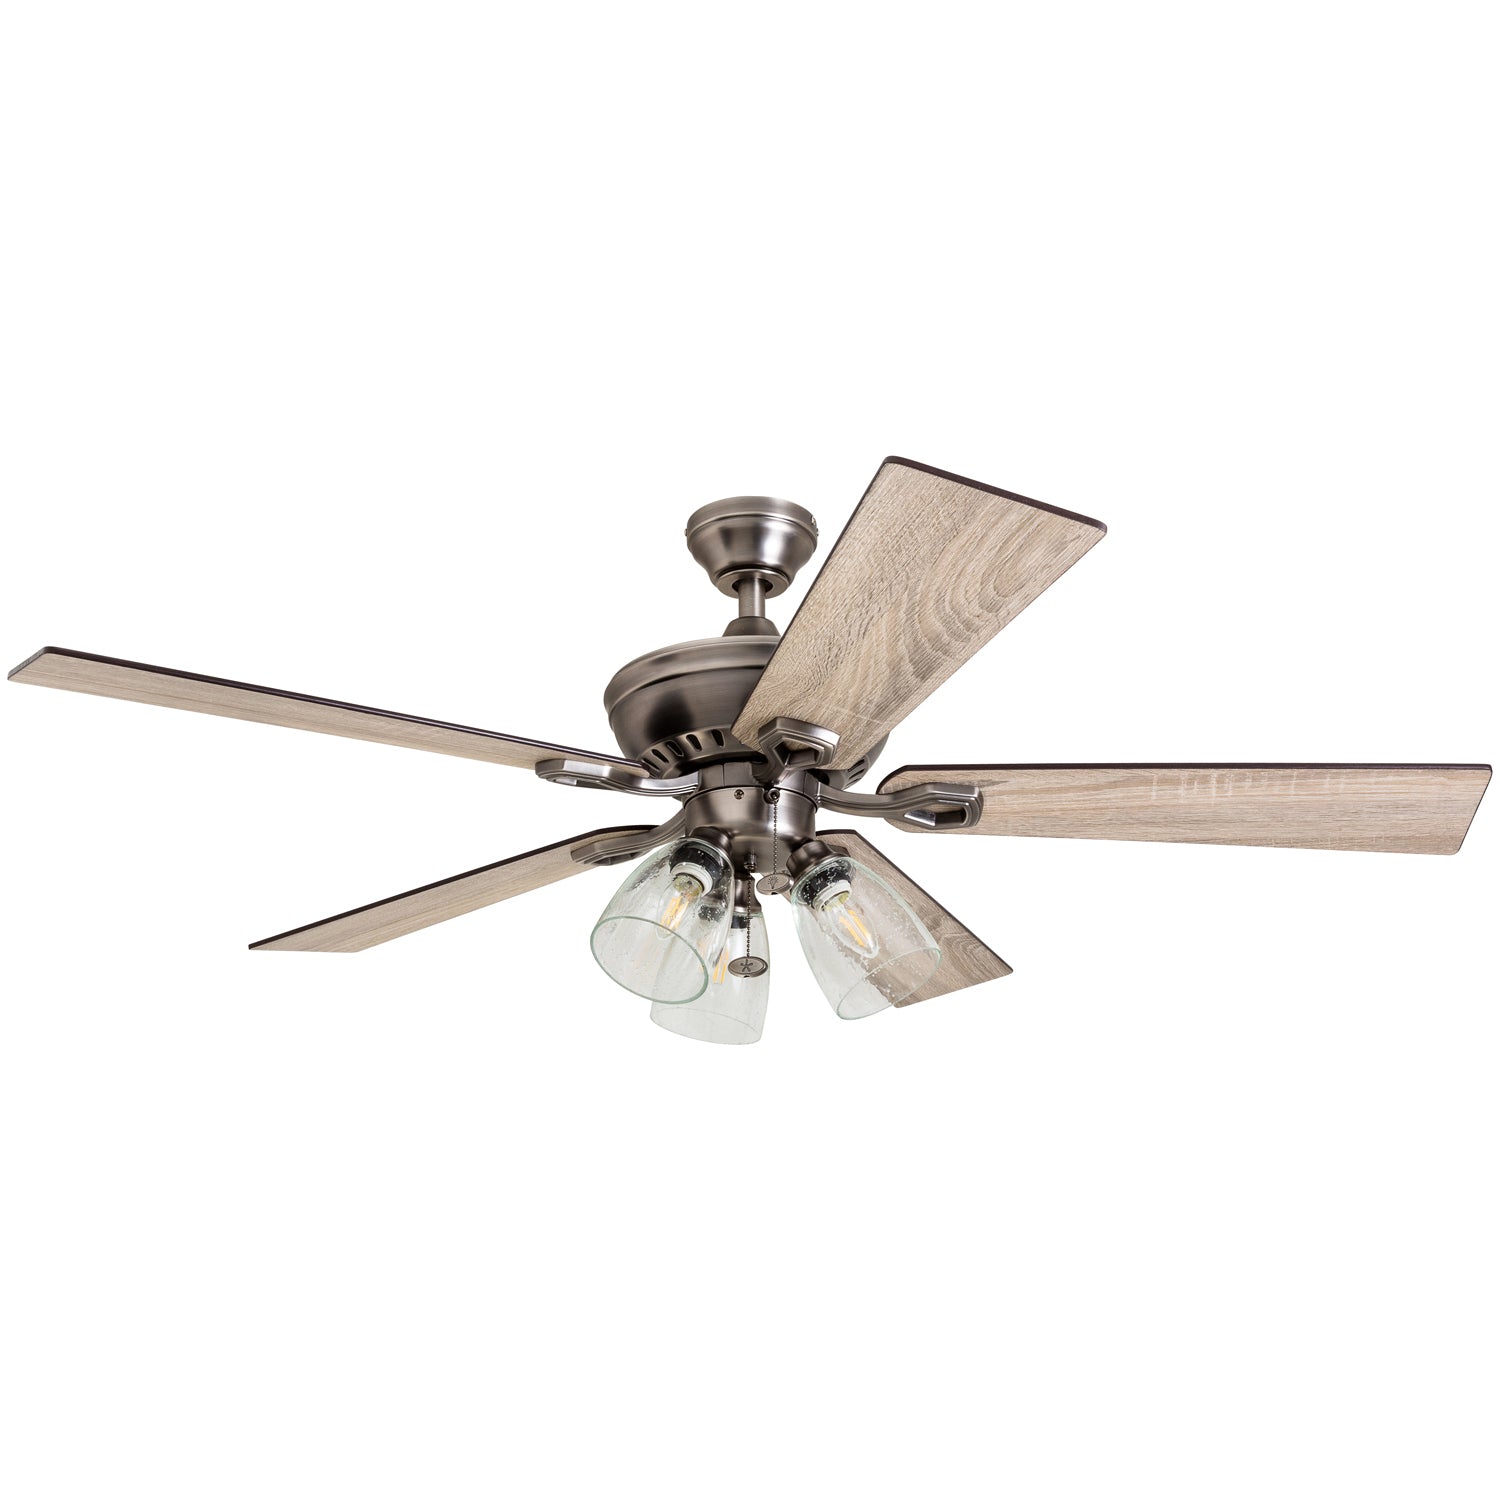 52 Inch Glenmont, Antique Pewter, Pull Chain, Ceiling Fan by Prominence Home